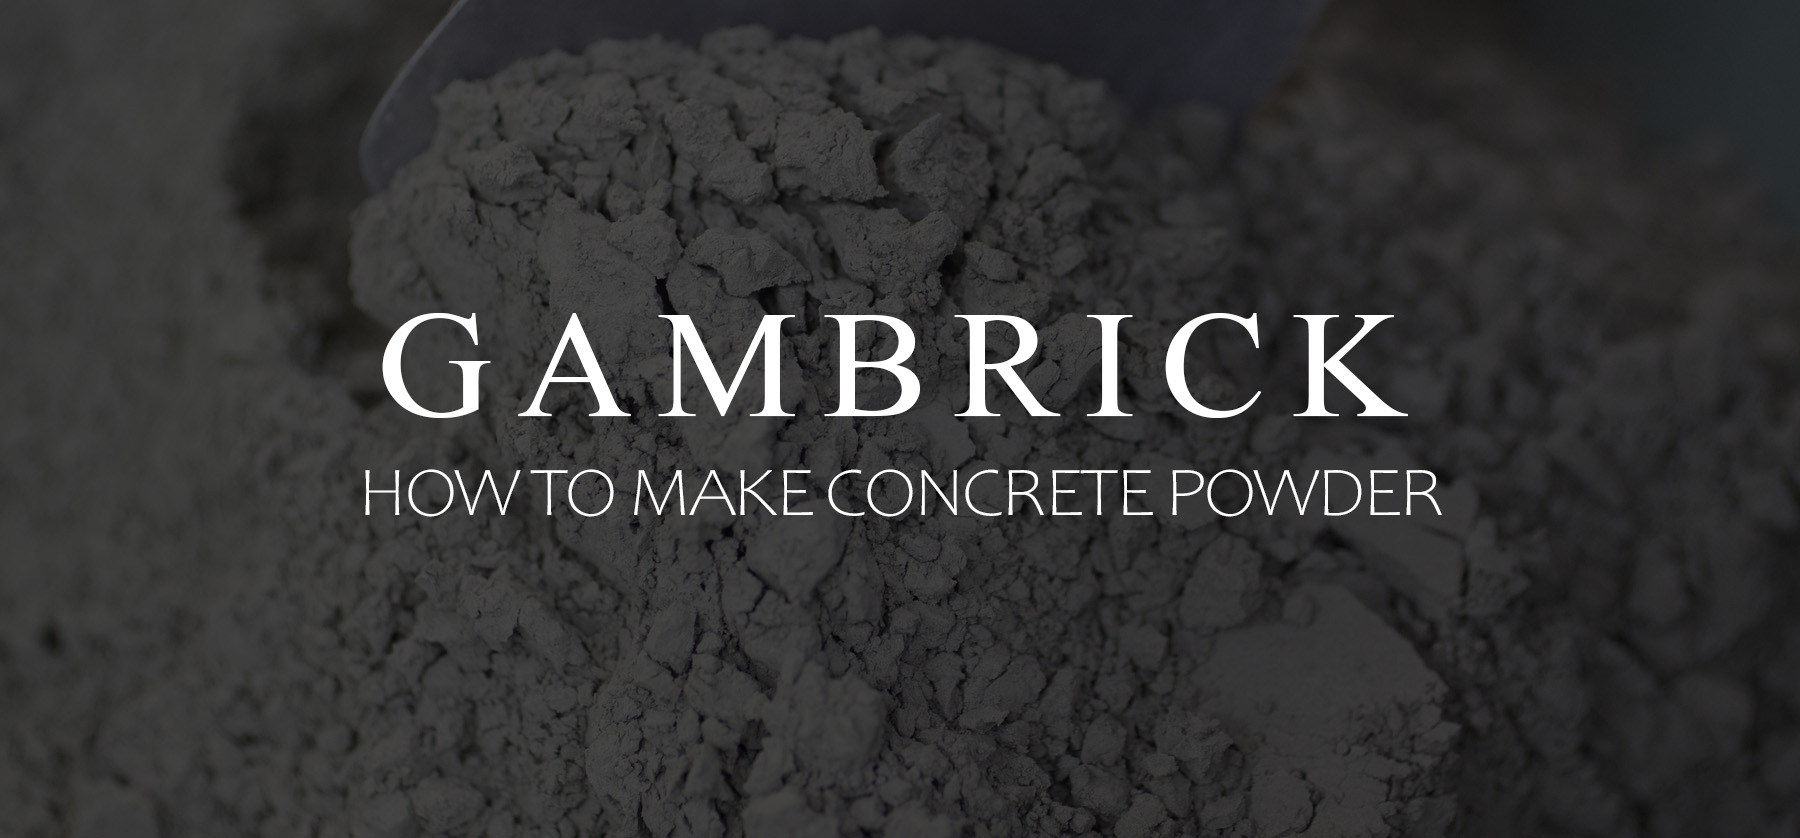 how to make concrete powder banner pic